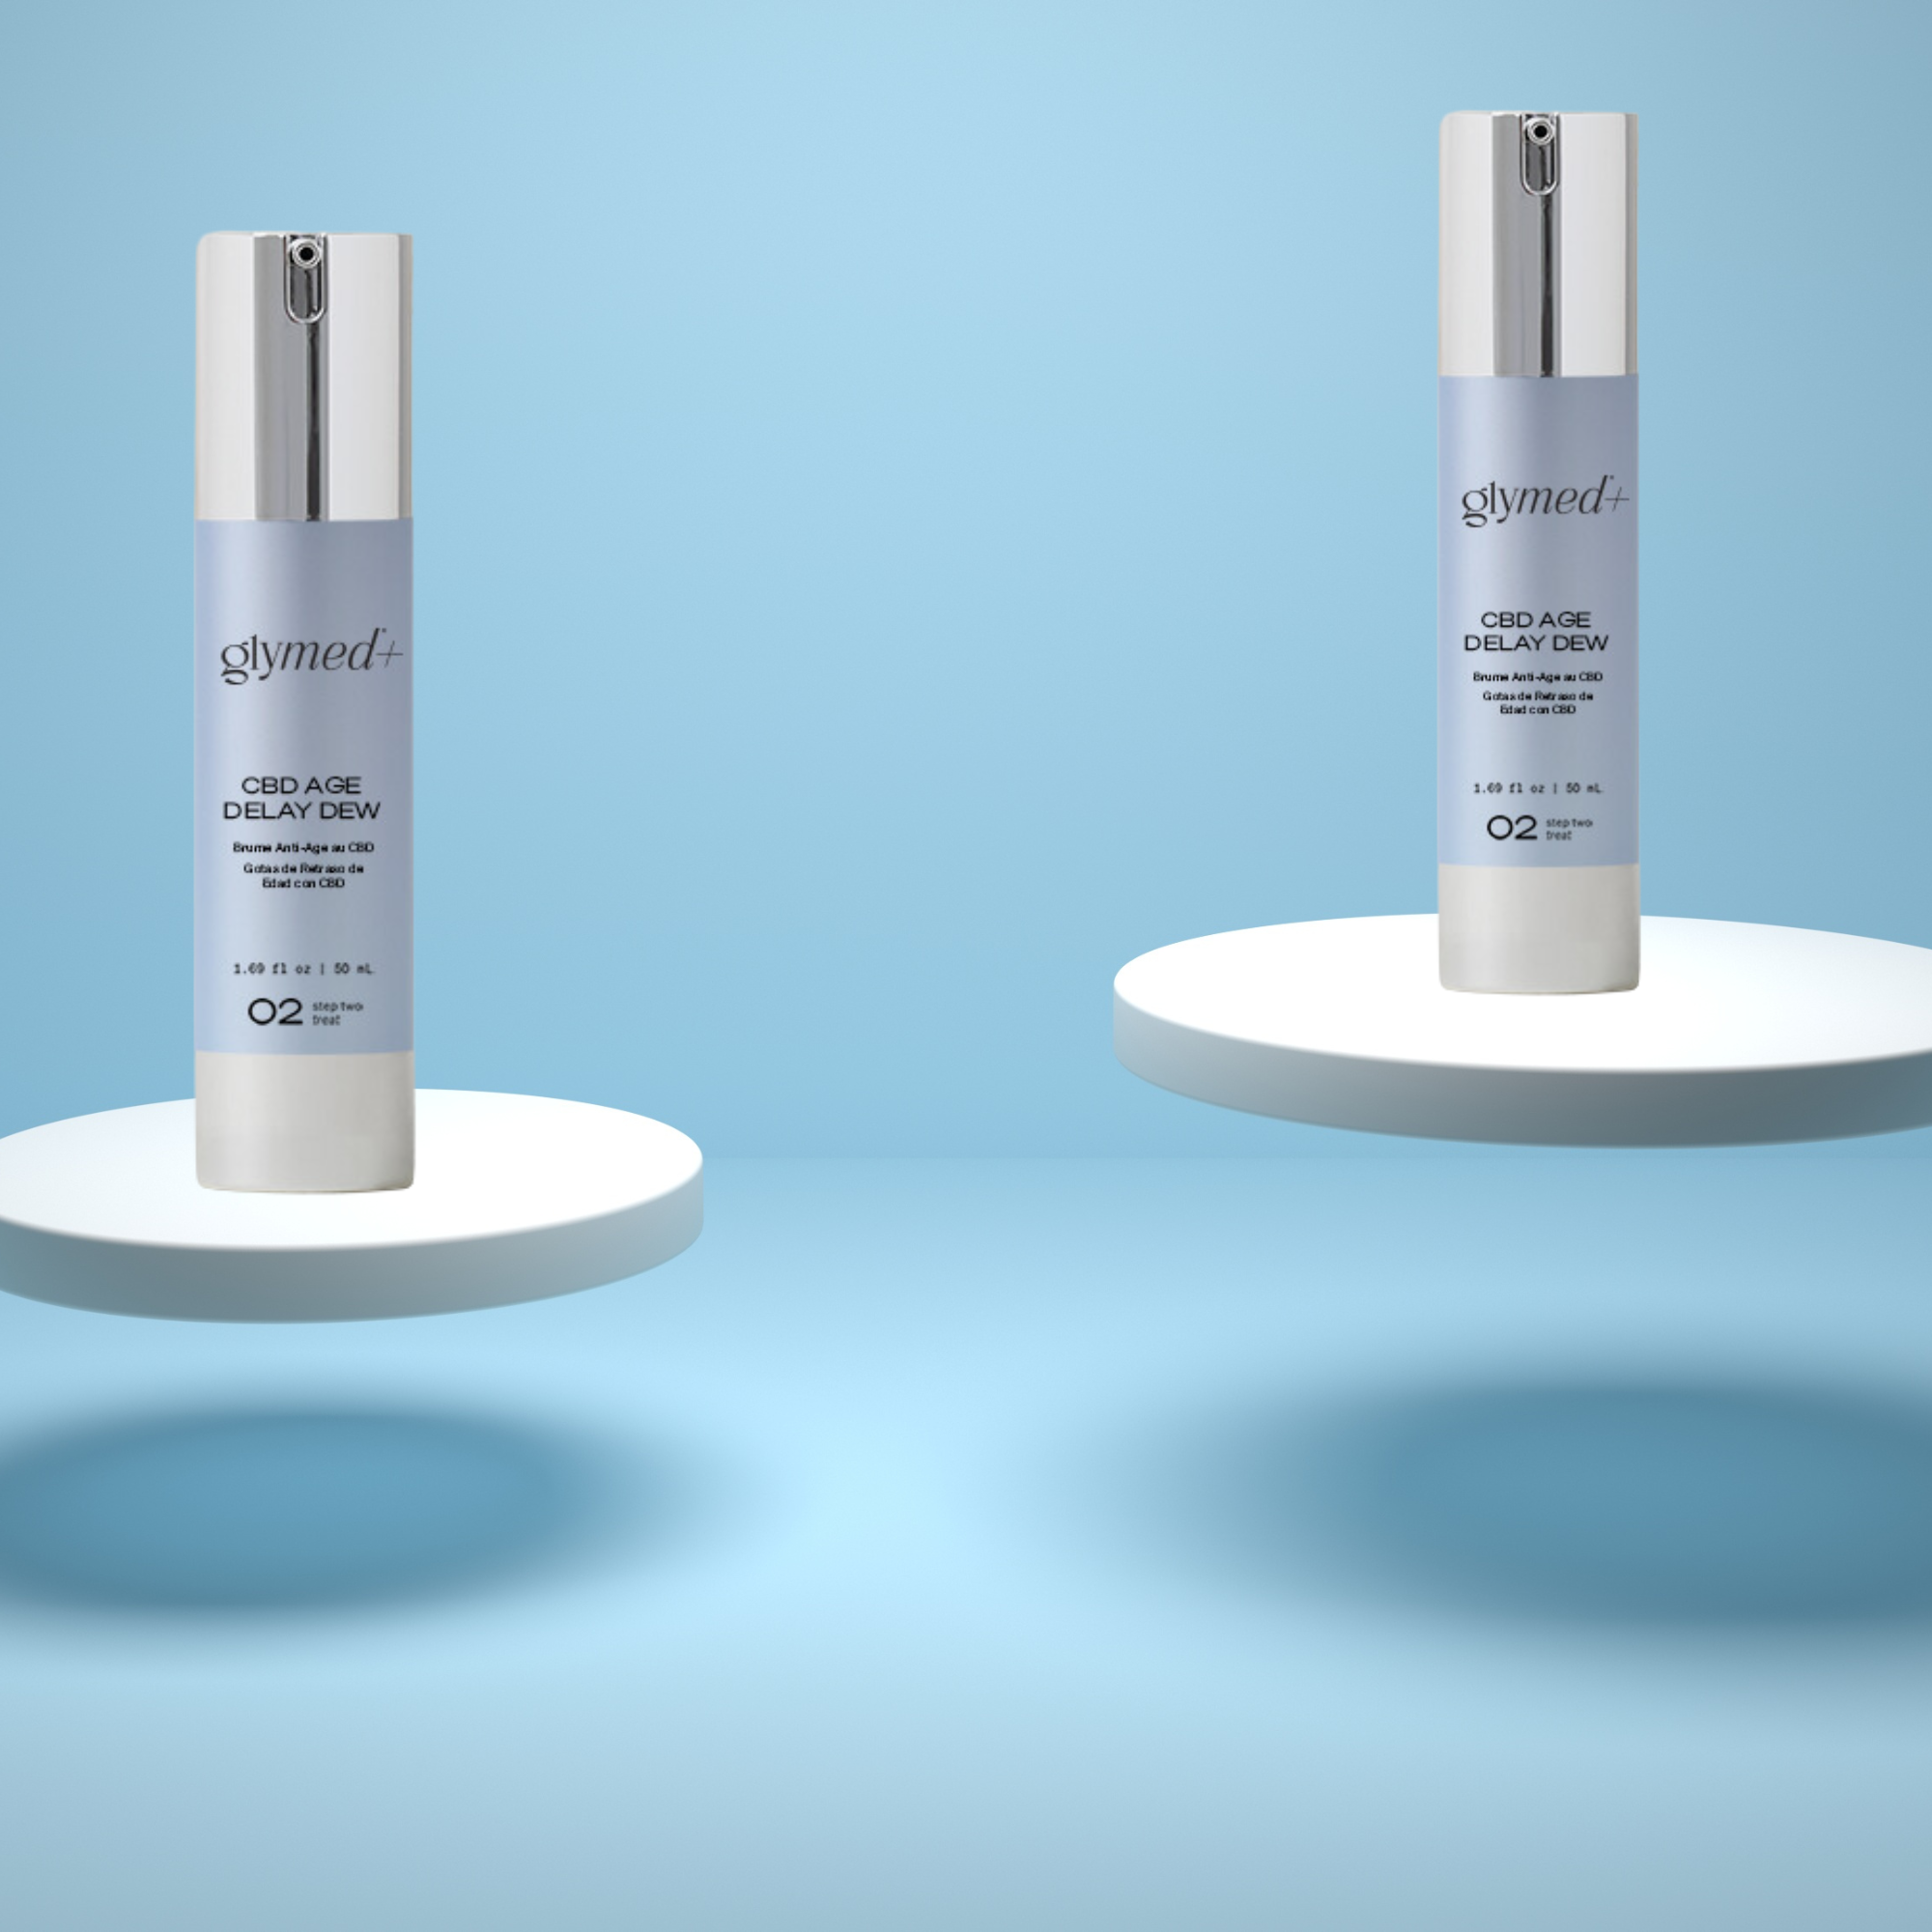 Age Delay Dew for Professional Facial Glow, Illuminate Your Skin, Renew and Refresh